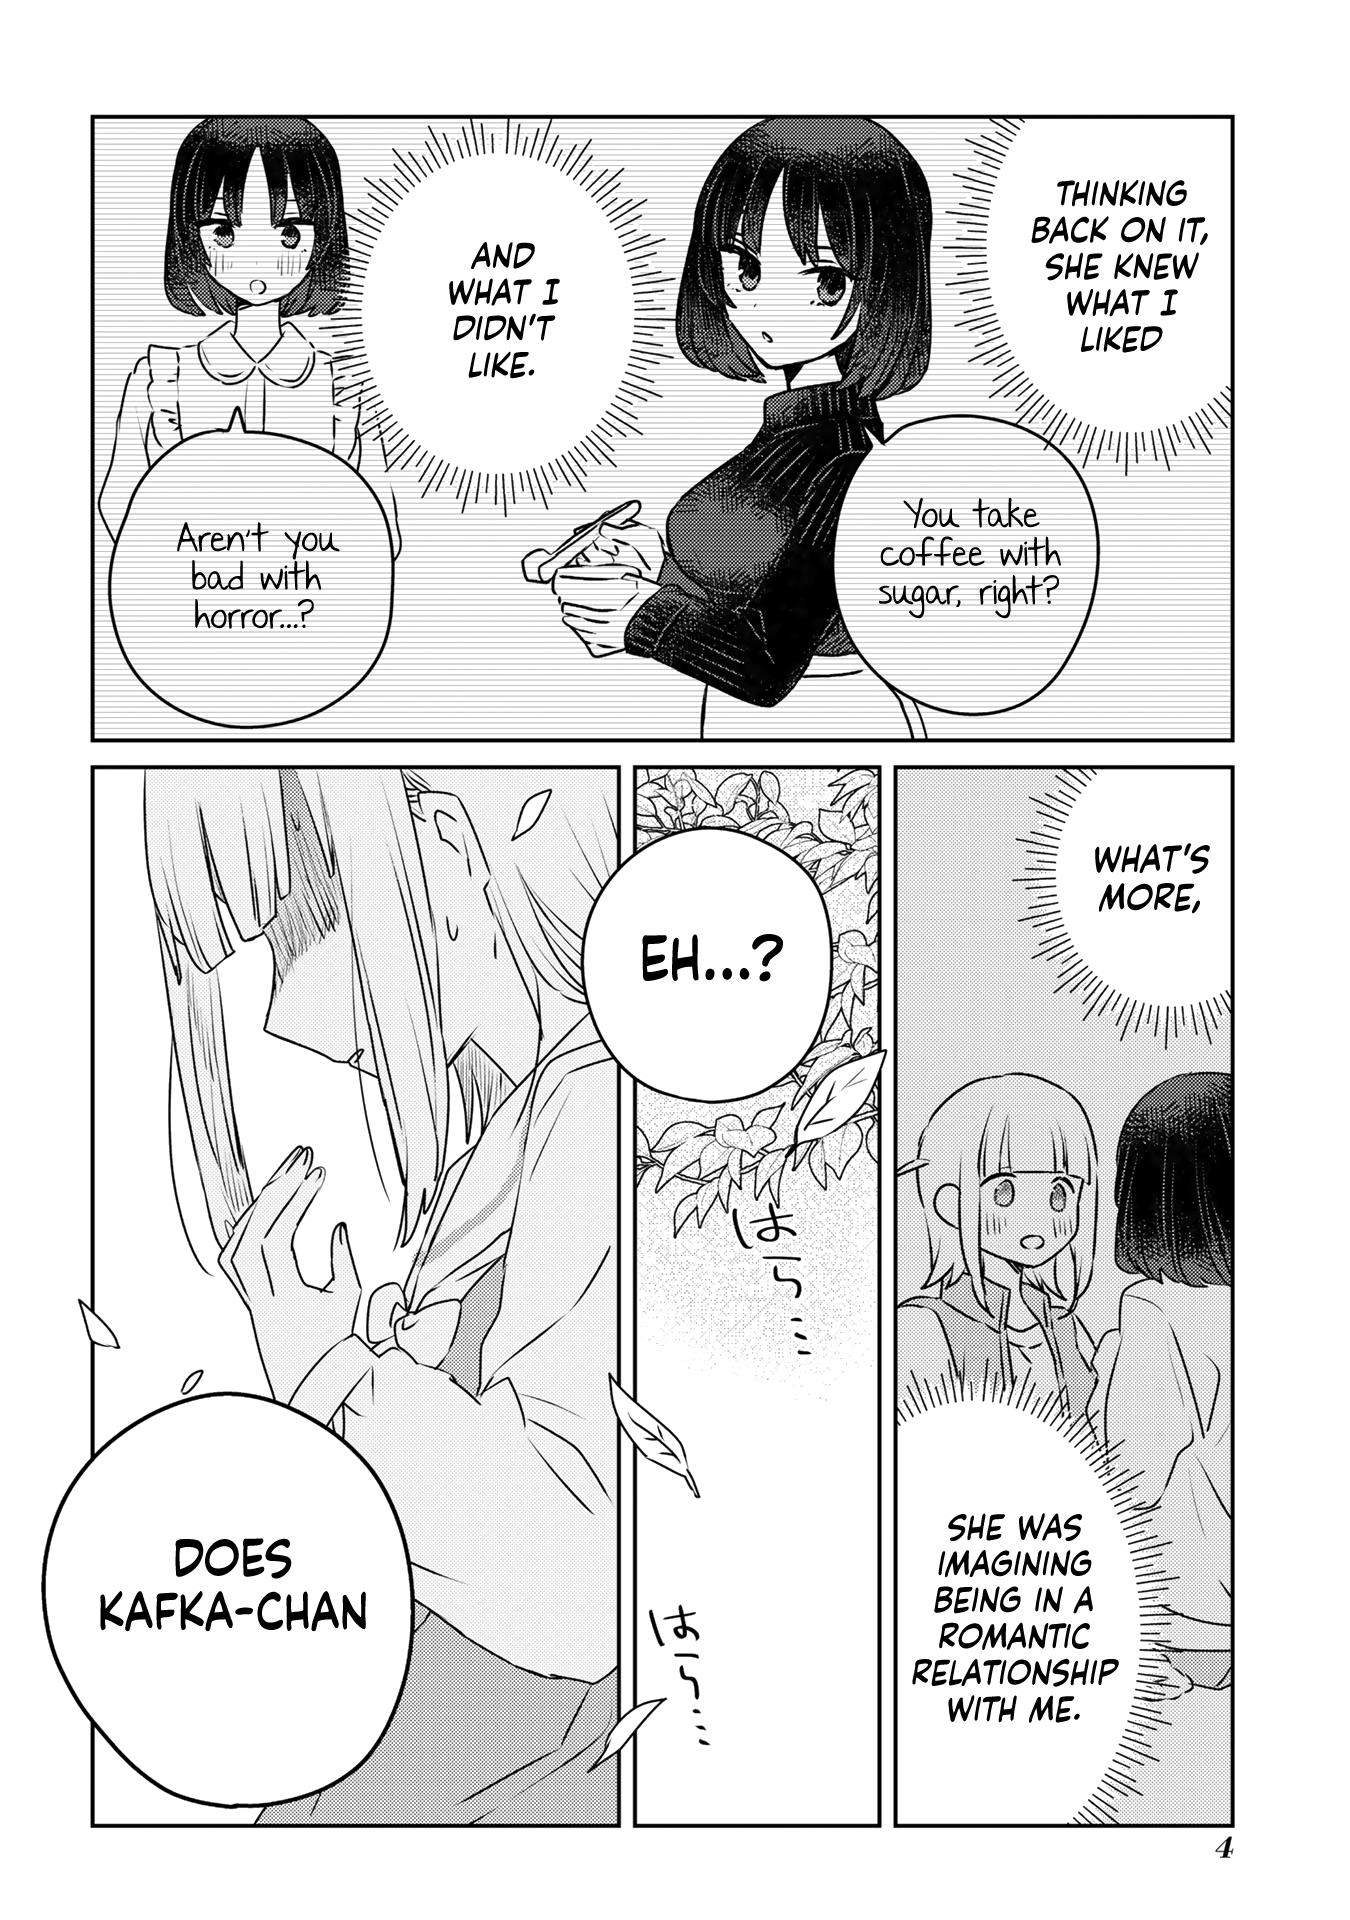 The Big Stepsis Who Wants To Be A Big Sister Vs. The Little Stepsis Who Wants To Be Yuri - Page 2